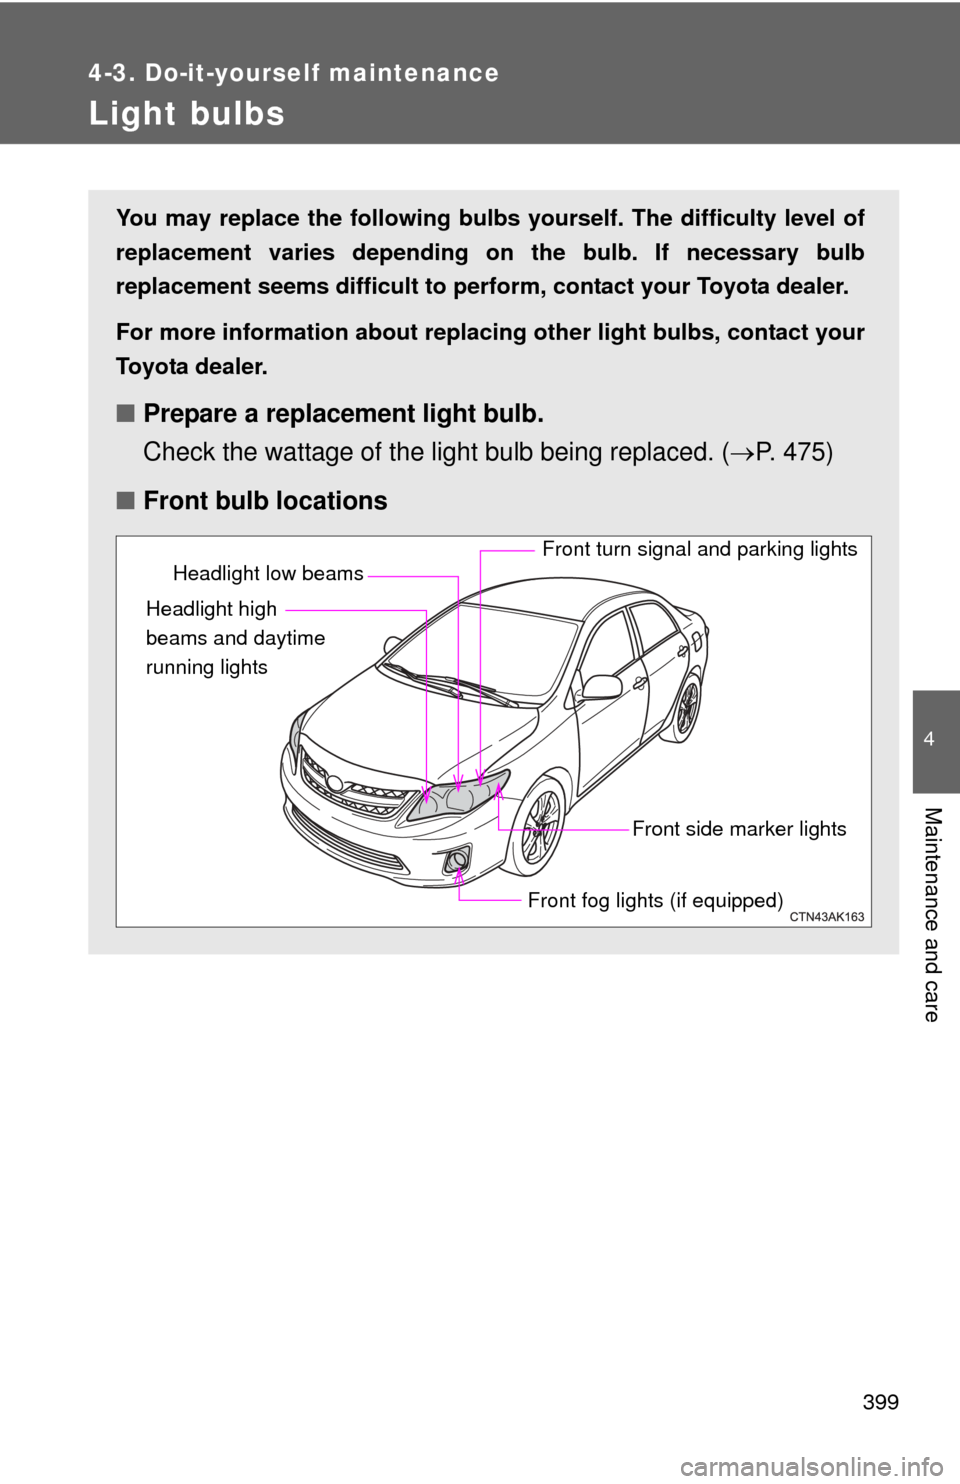 TOYOTA COROLLA 2012 10.G Owners Manual 399
4-3. Do-it-yourself maintenance
4
Maintenance and care
Light bulbs
You may replace the following bulbs yourself. The difficulty level of
replacement varies depending on the bulb. If necessary bulb